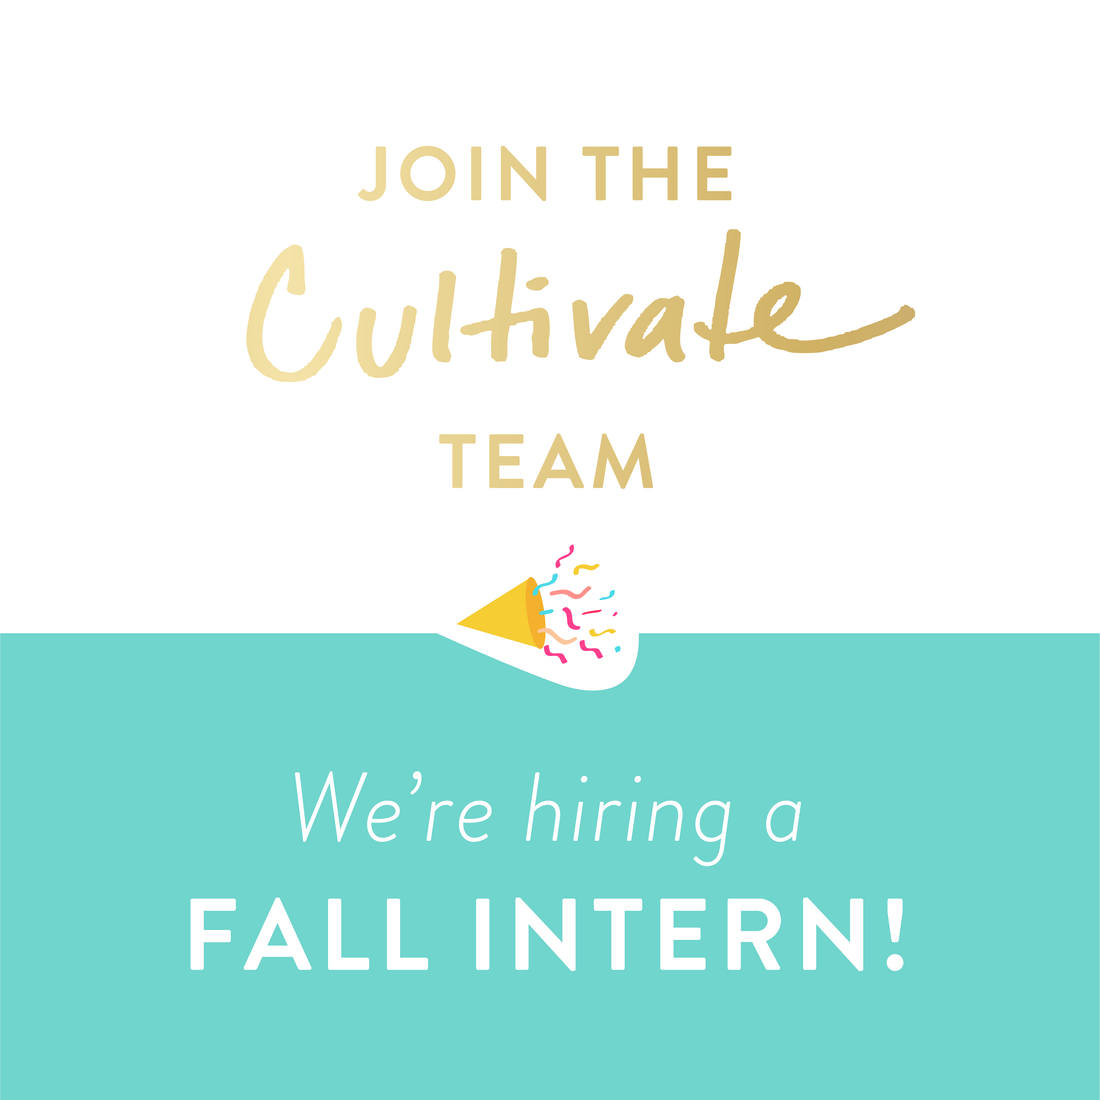 Intern with Cultivate What Matters This Fall!